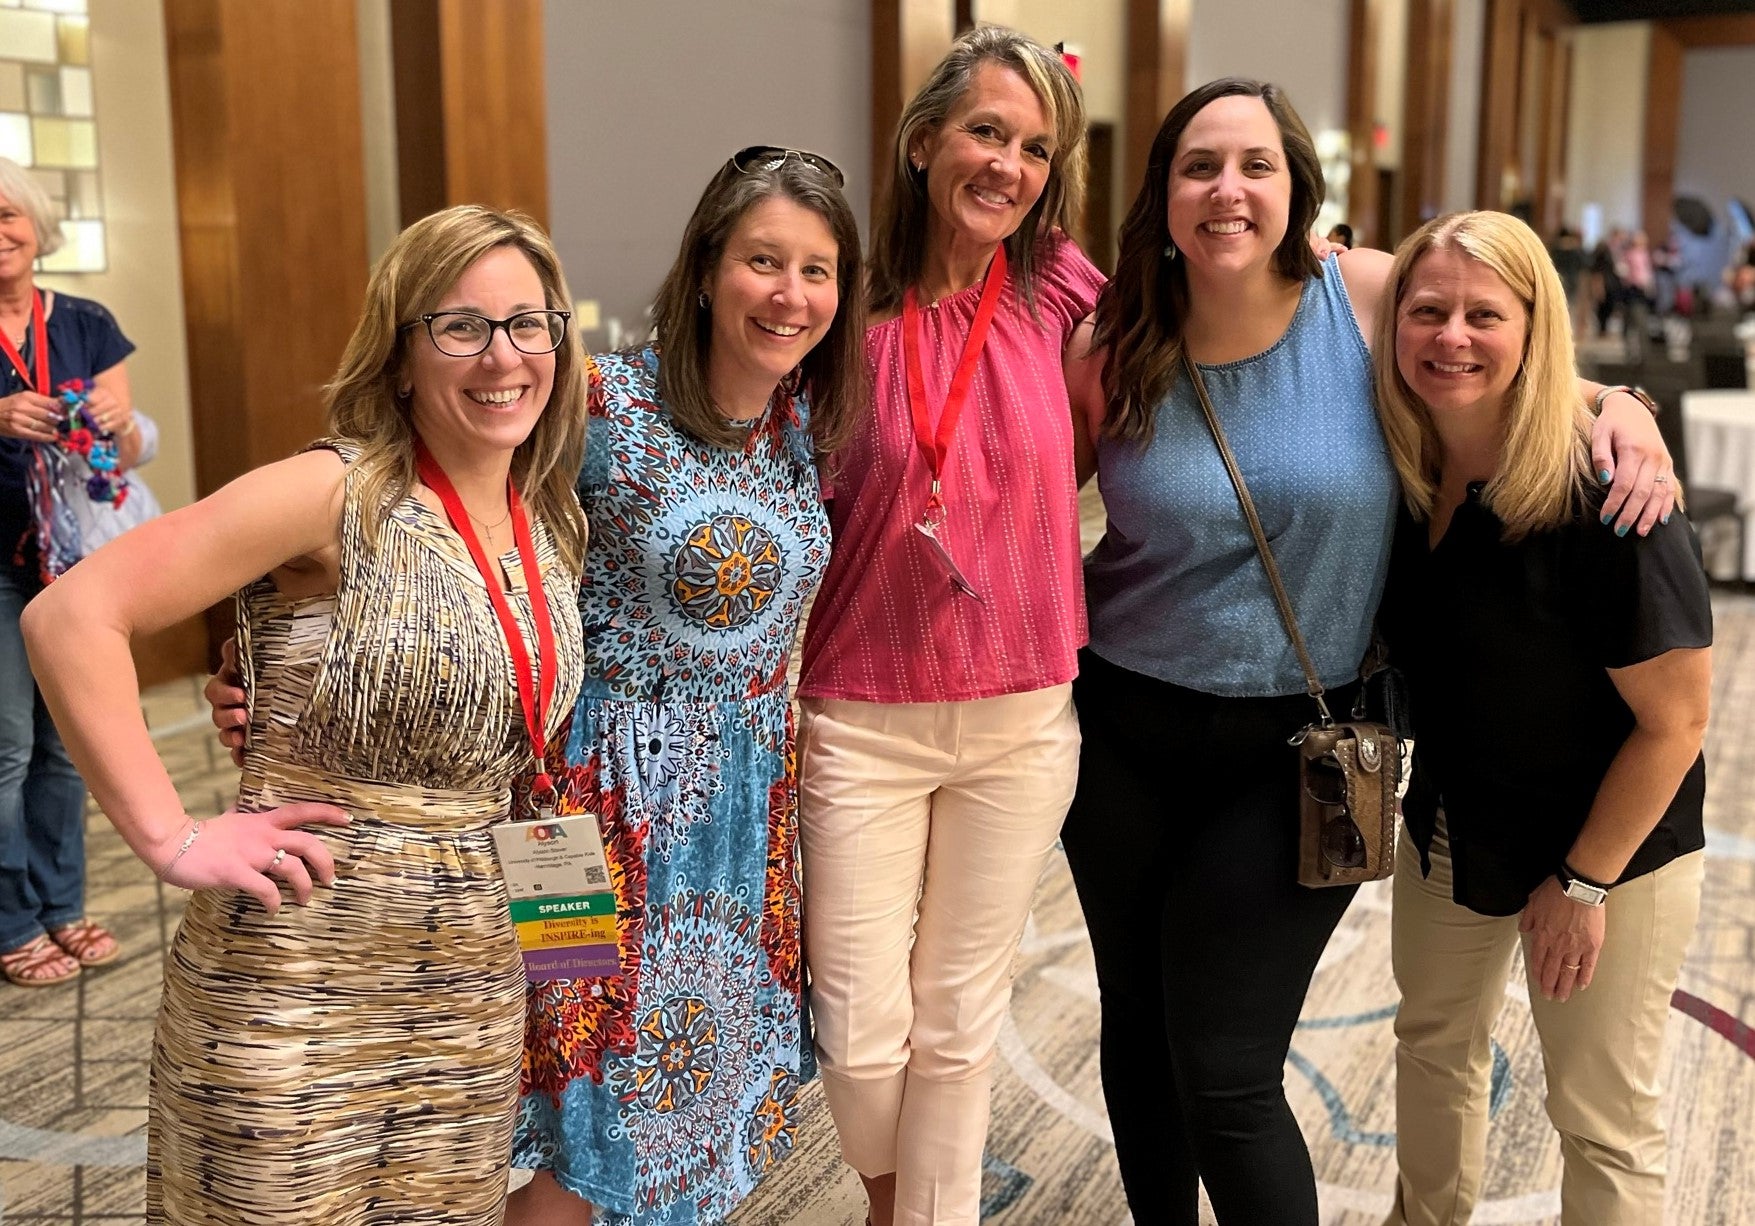 Pitt Occupational Therapy faculty at the 2022 American Occupational Therapy Association (AOTA) Inspire Conference (left to right): Alyson Stover (AOTA President), Erin Mathia (CScD graduate) , Pamela Toto, Kelsey Voltz-Poremba (CScD graduate), Ann Marsico (CScD graduate)